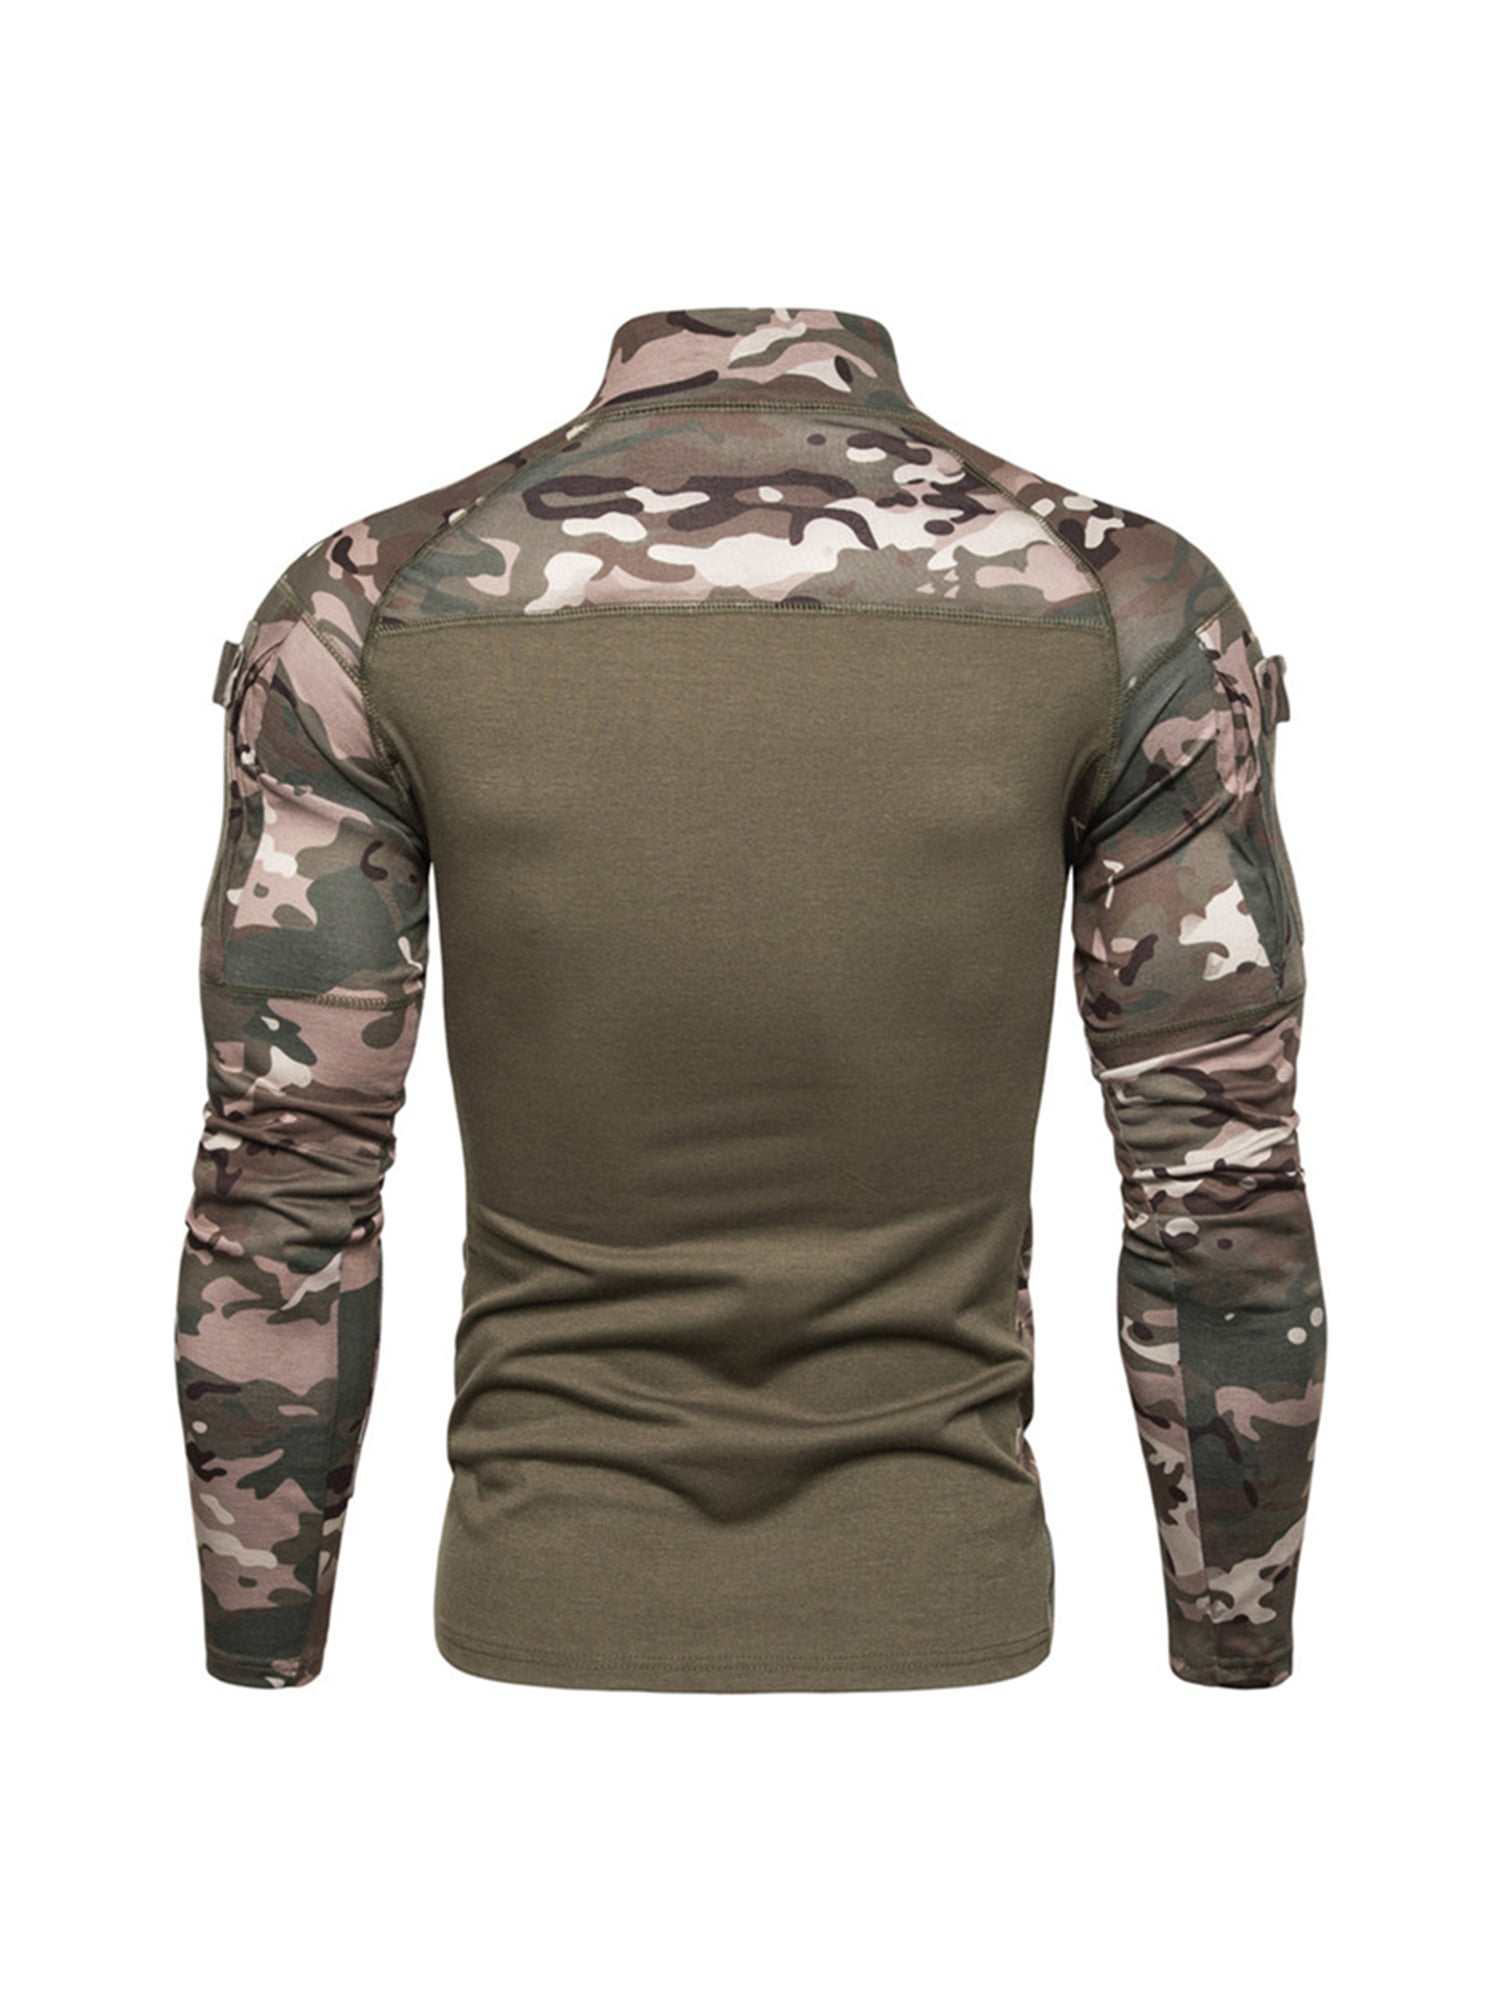 Tactical Combat Hoodie Military Army Long Sleeve Zipper T-Shirt Slim Tops Blouse 